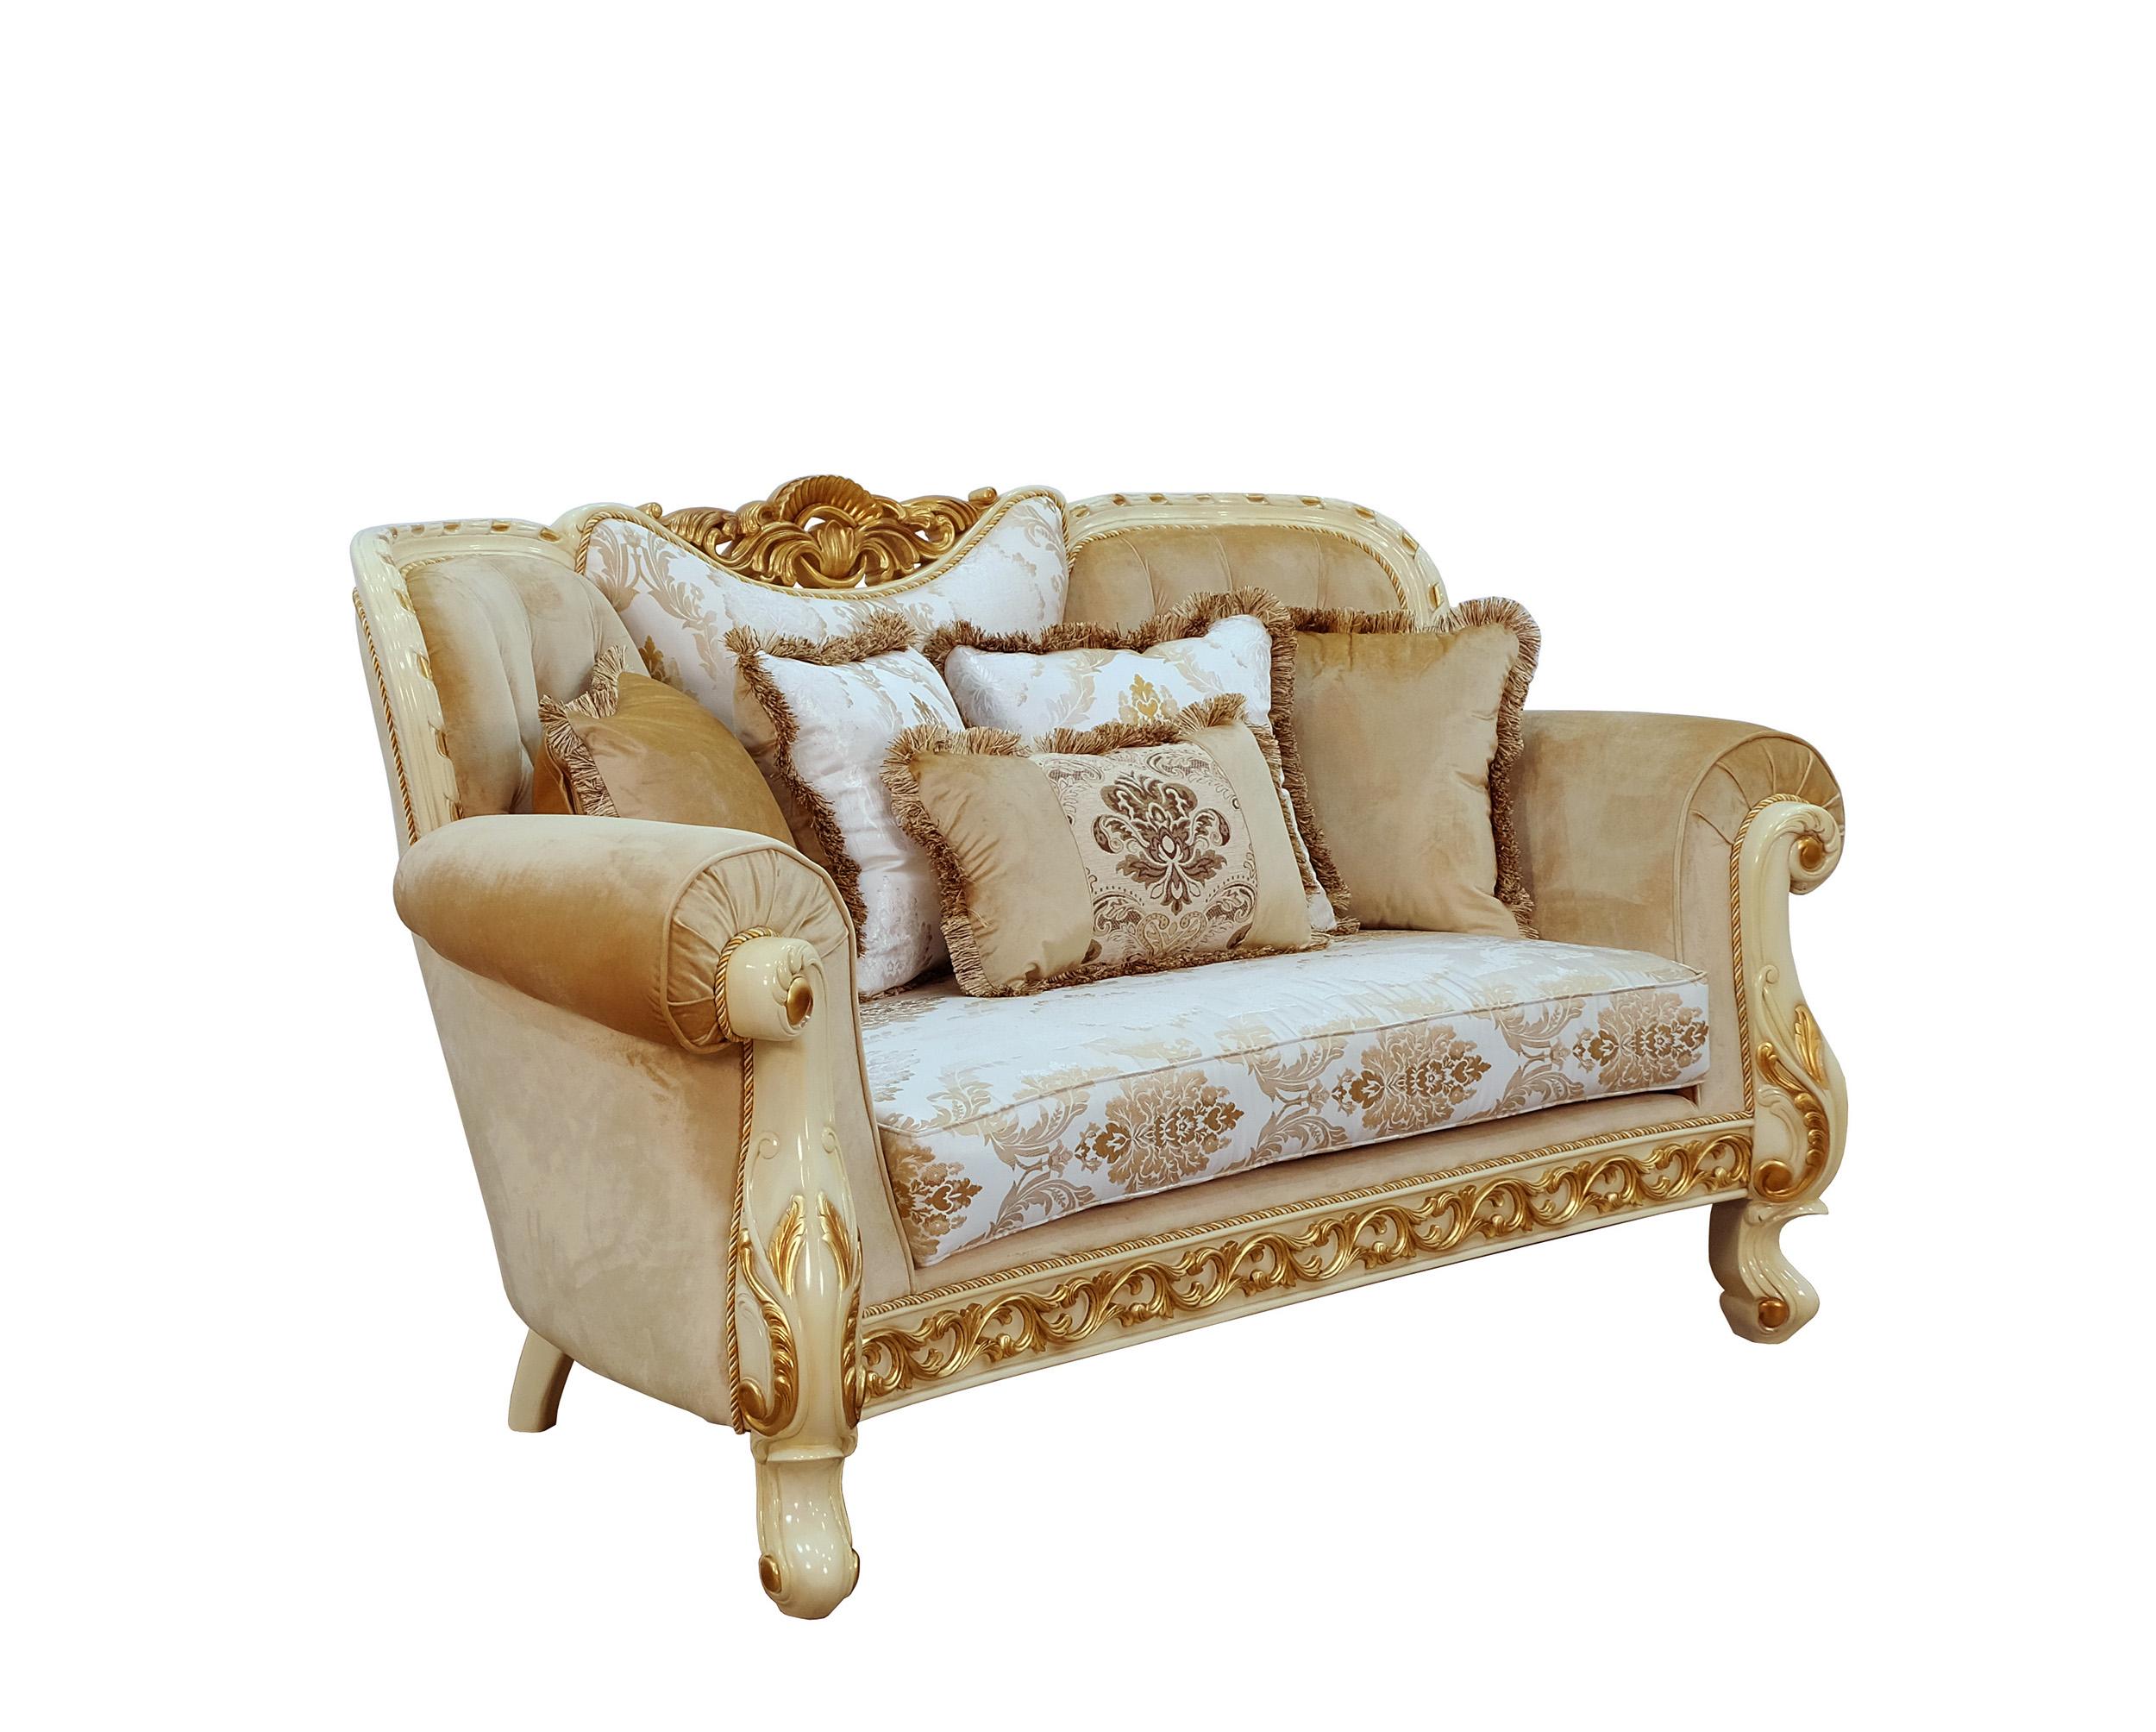 Classic, Traditional Loveseat FANTASIA 40015-L in Off-White, Sand, Gold Fabric